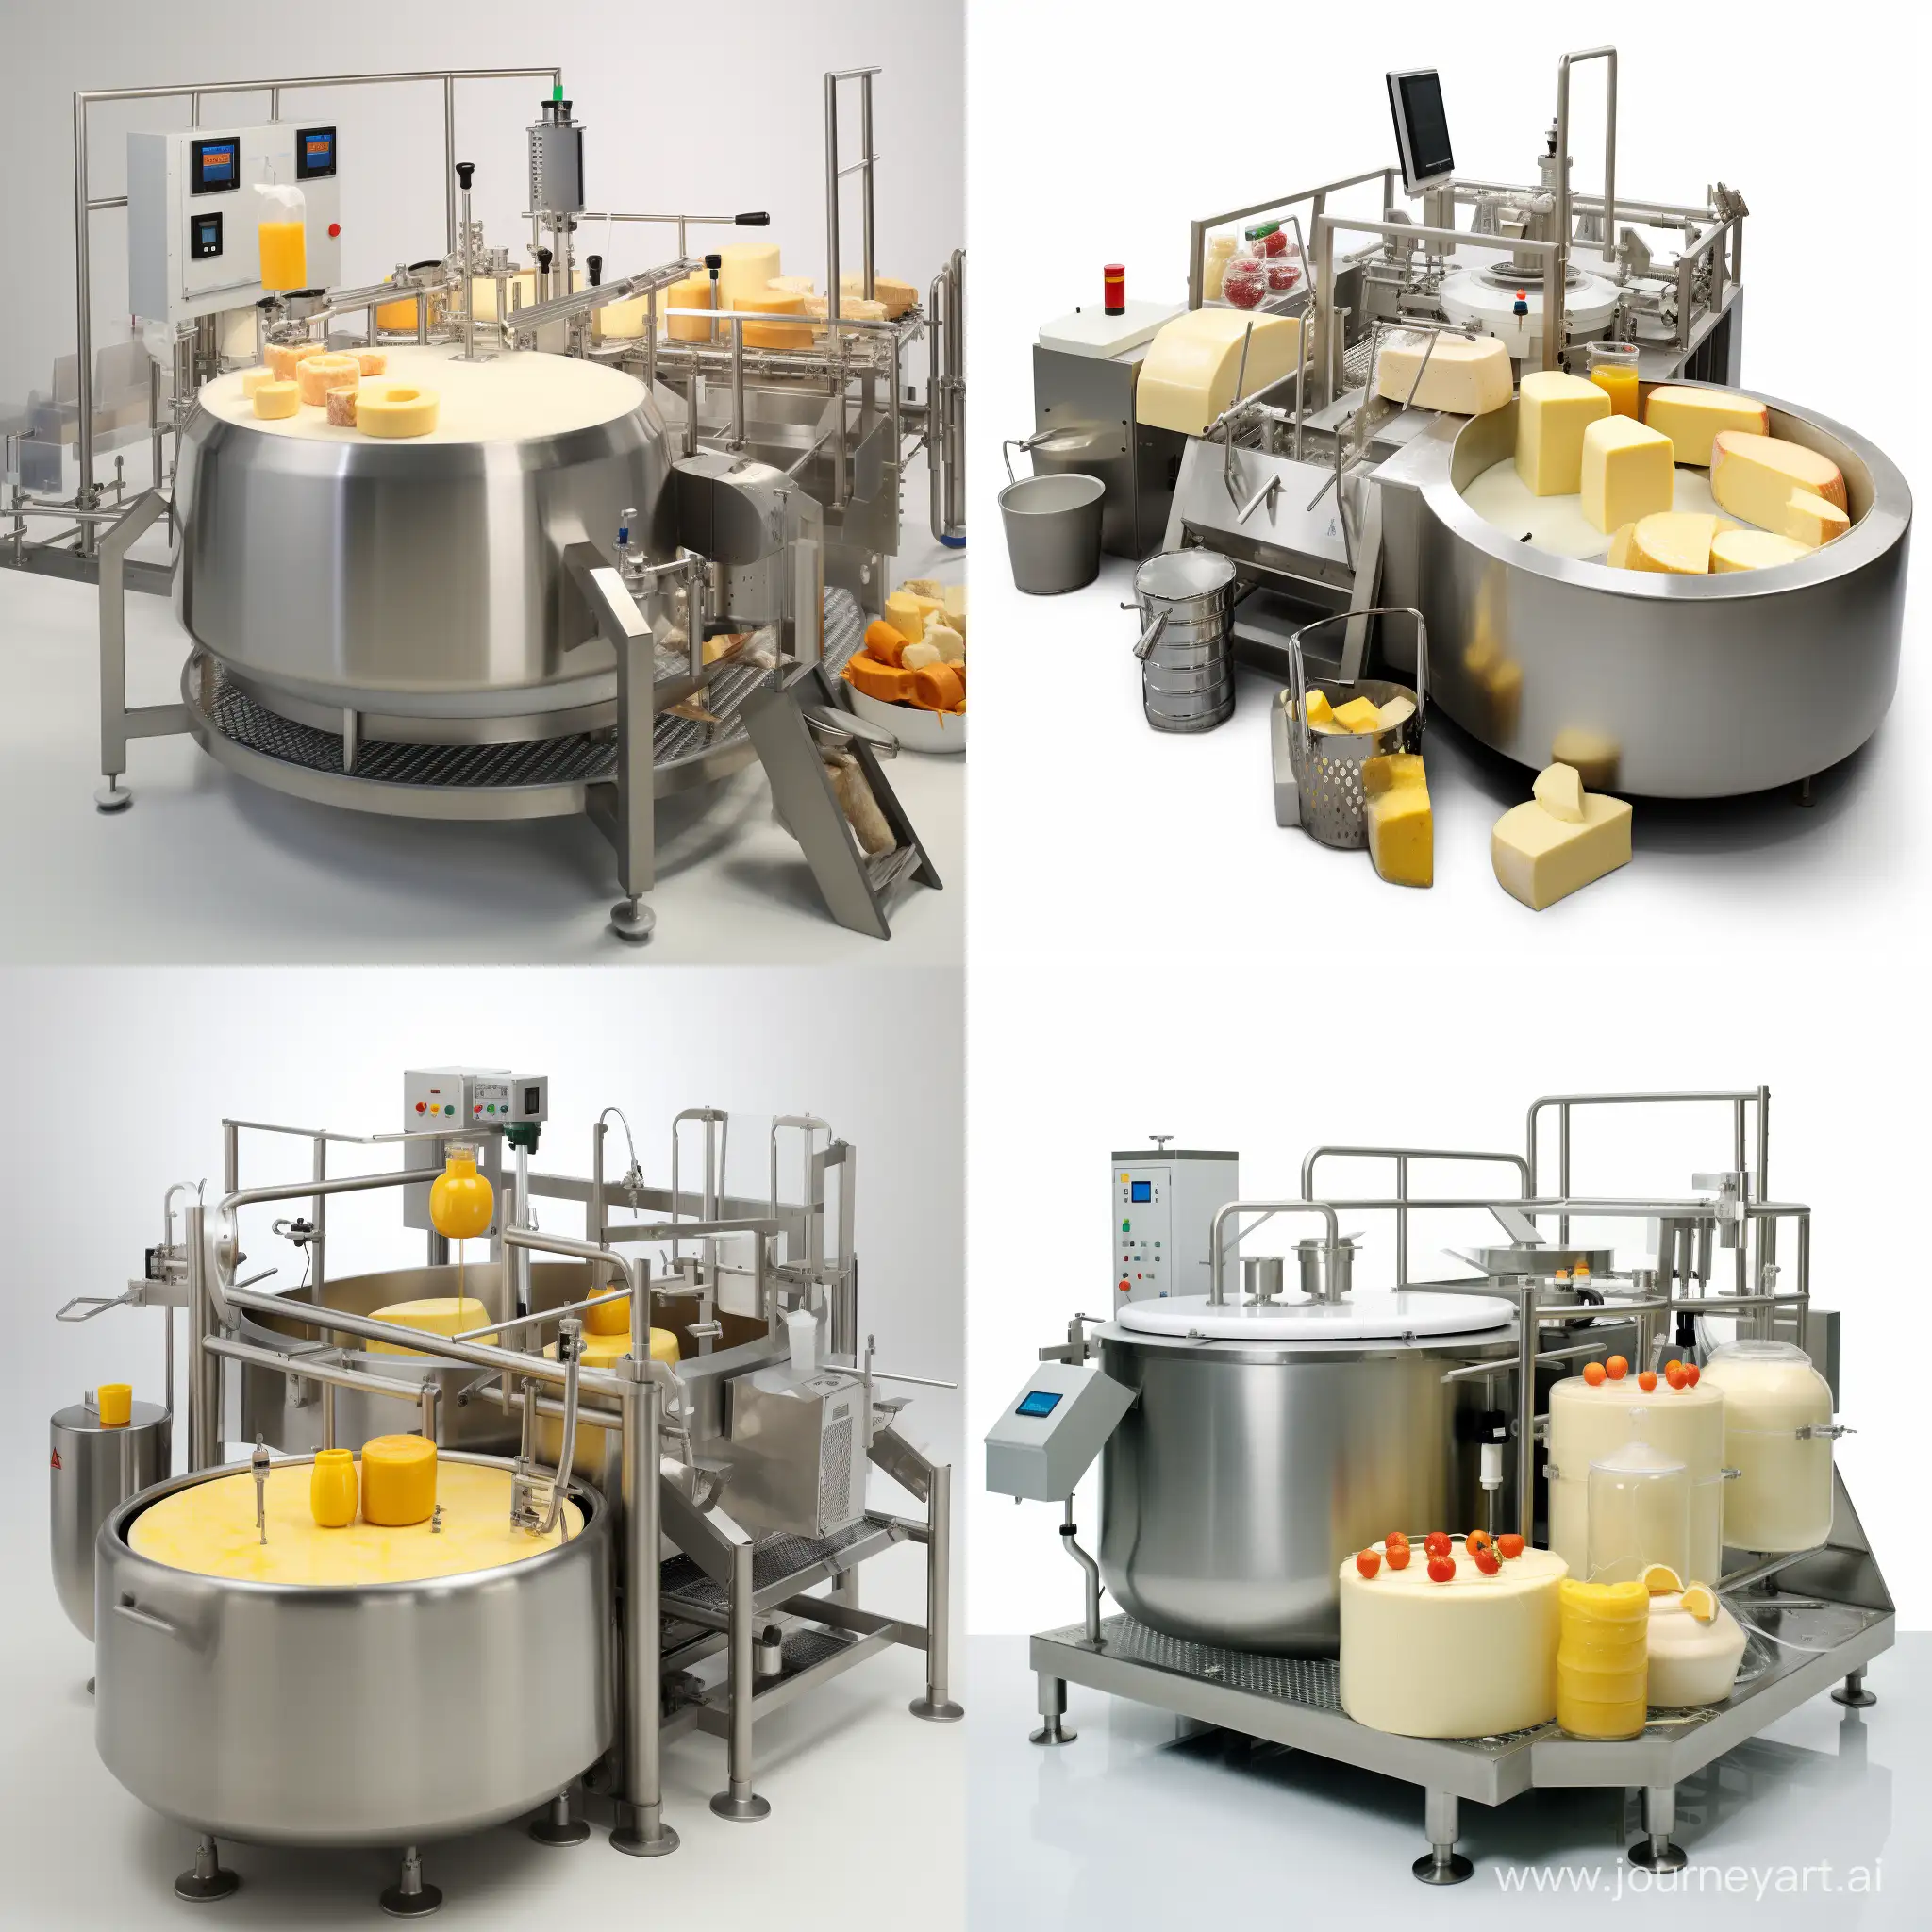 The cheese manufacturer is an open-type cylindrical cheese-making tub with a rotating stirrer.
It consists of the following main components:
- baths with heating and cooling jackets with disc valves for serum discharge and clot discharge;
- with removable lid;
- with removable stirrer and lyre;
- with heating and cooling;
- control cabinet of electrical equipment with the possibility of making cheese and cottage cheese.

